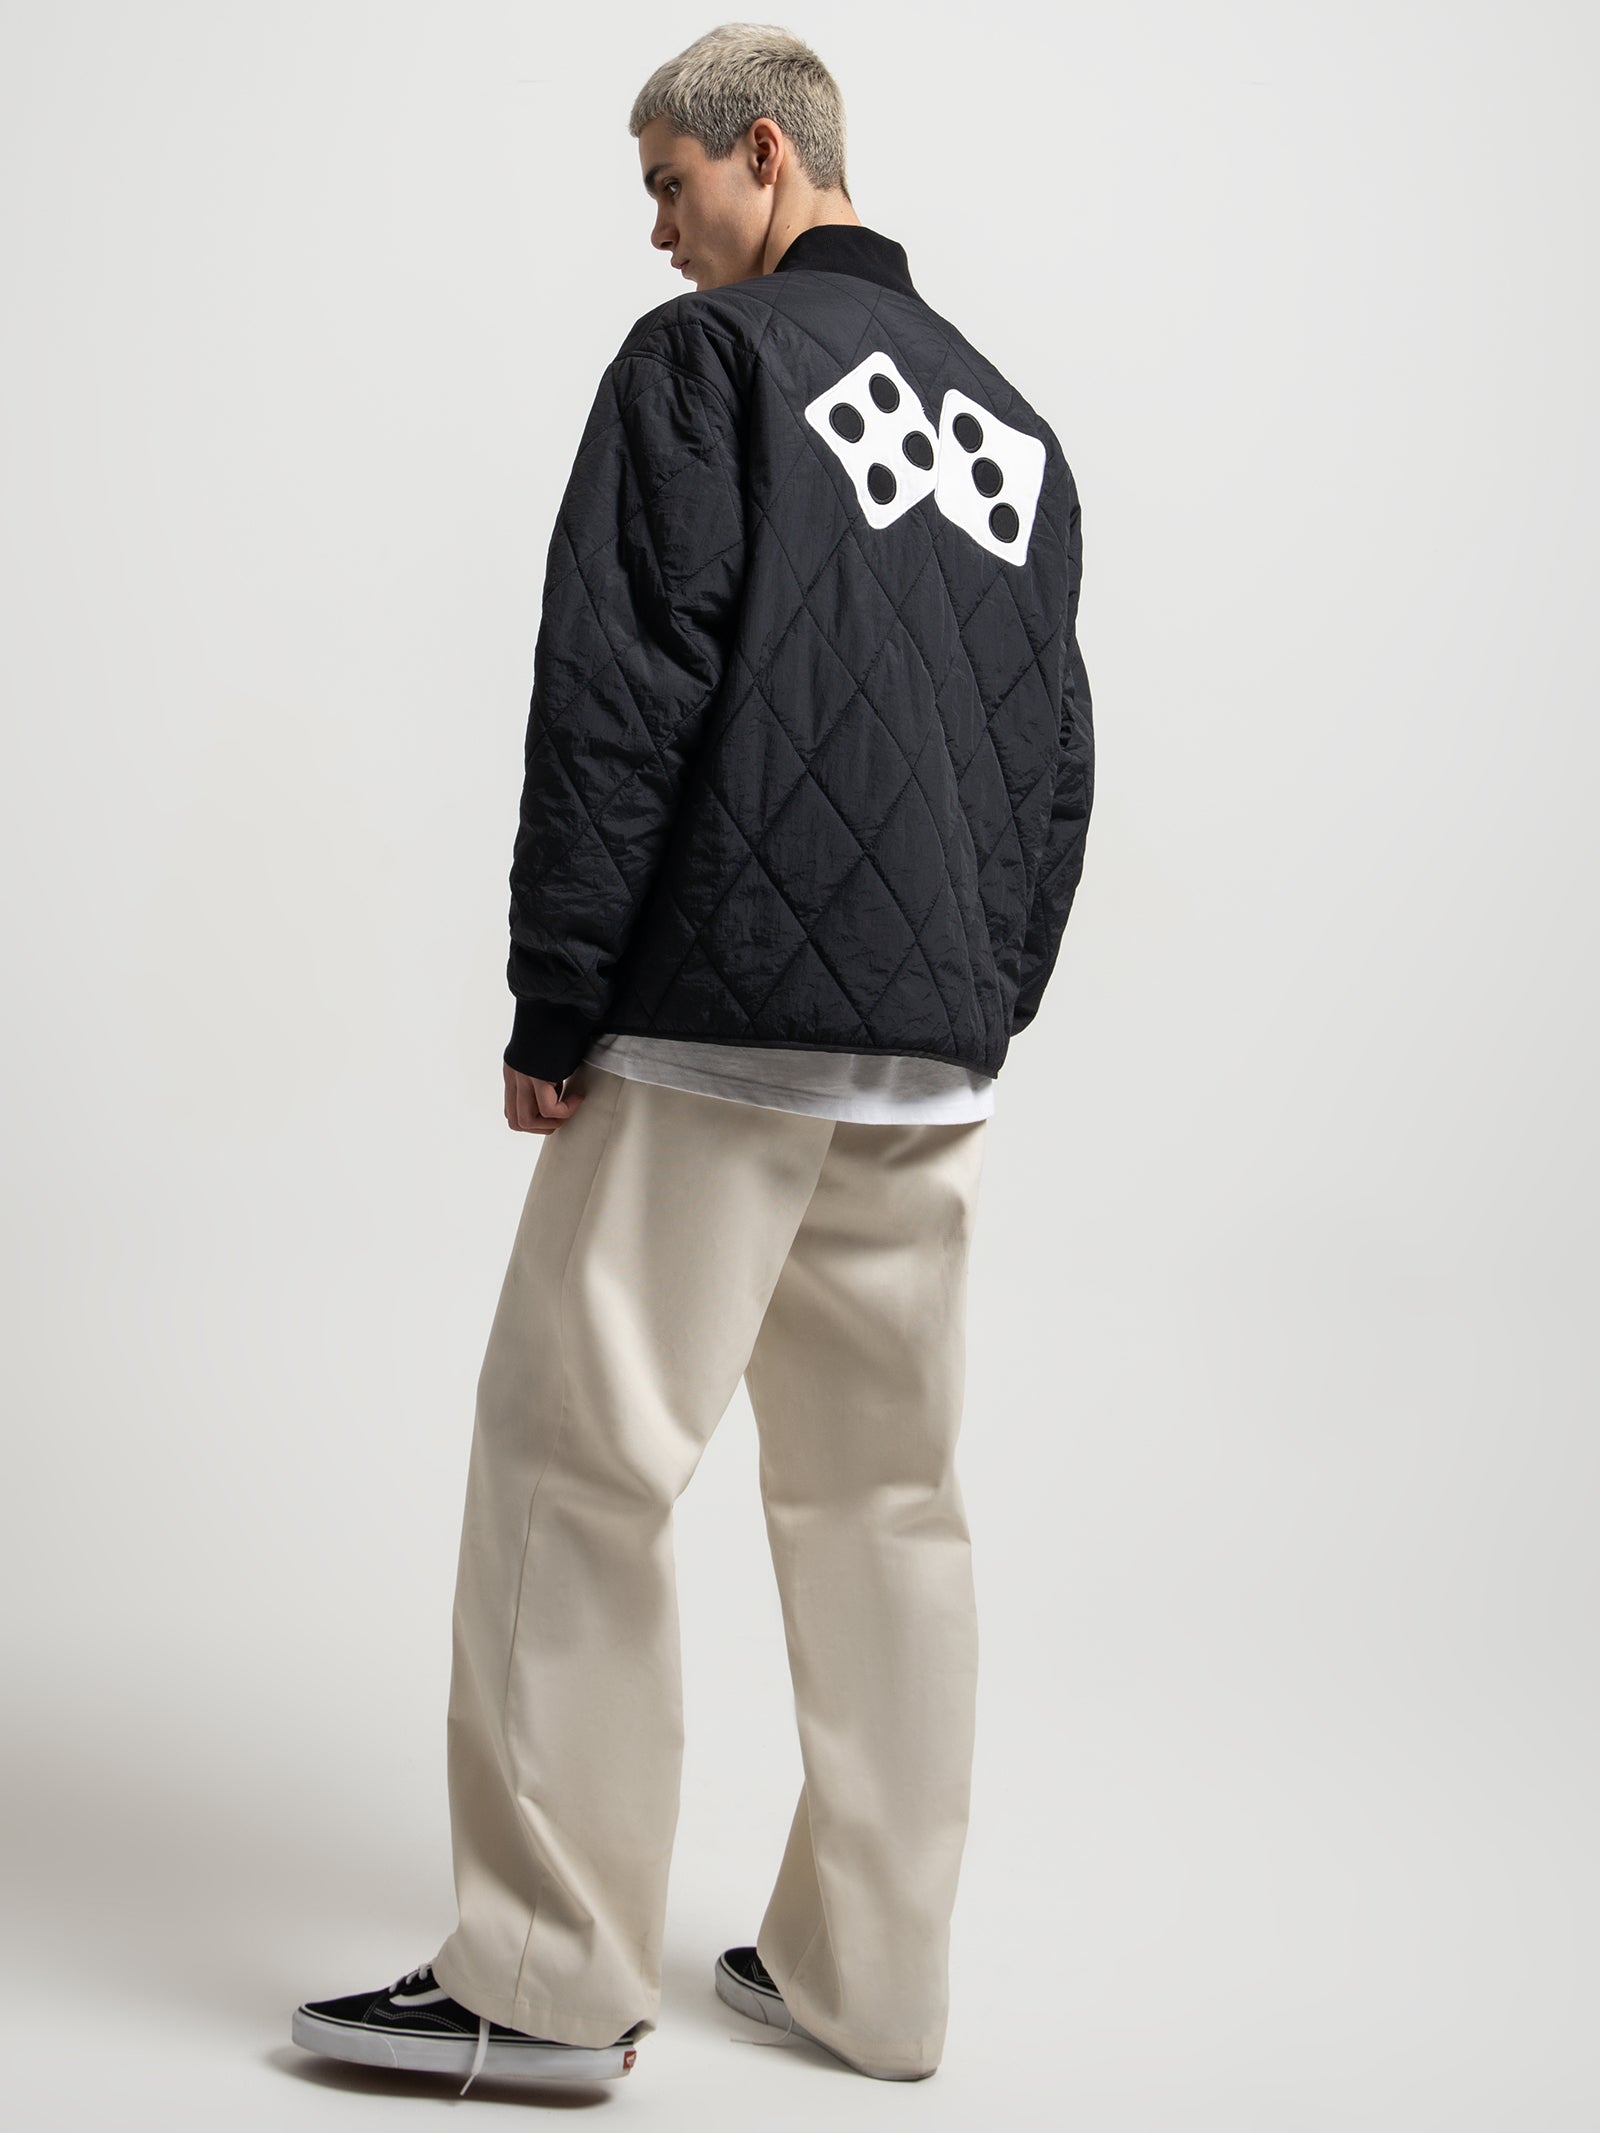 Dice Quilted Jacket in Black - Glue Store